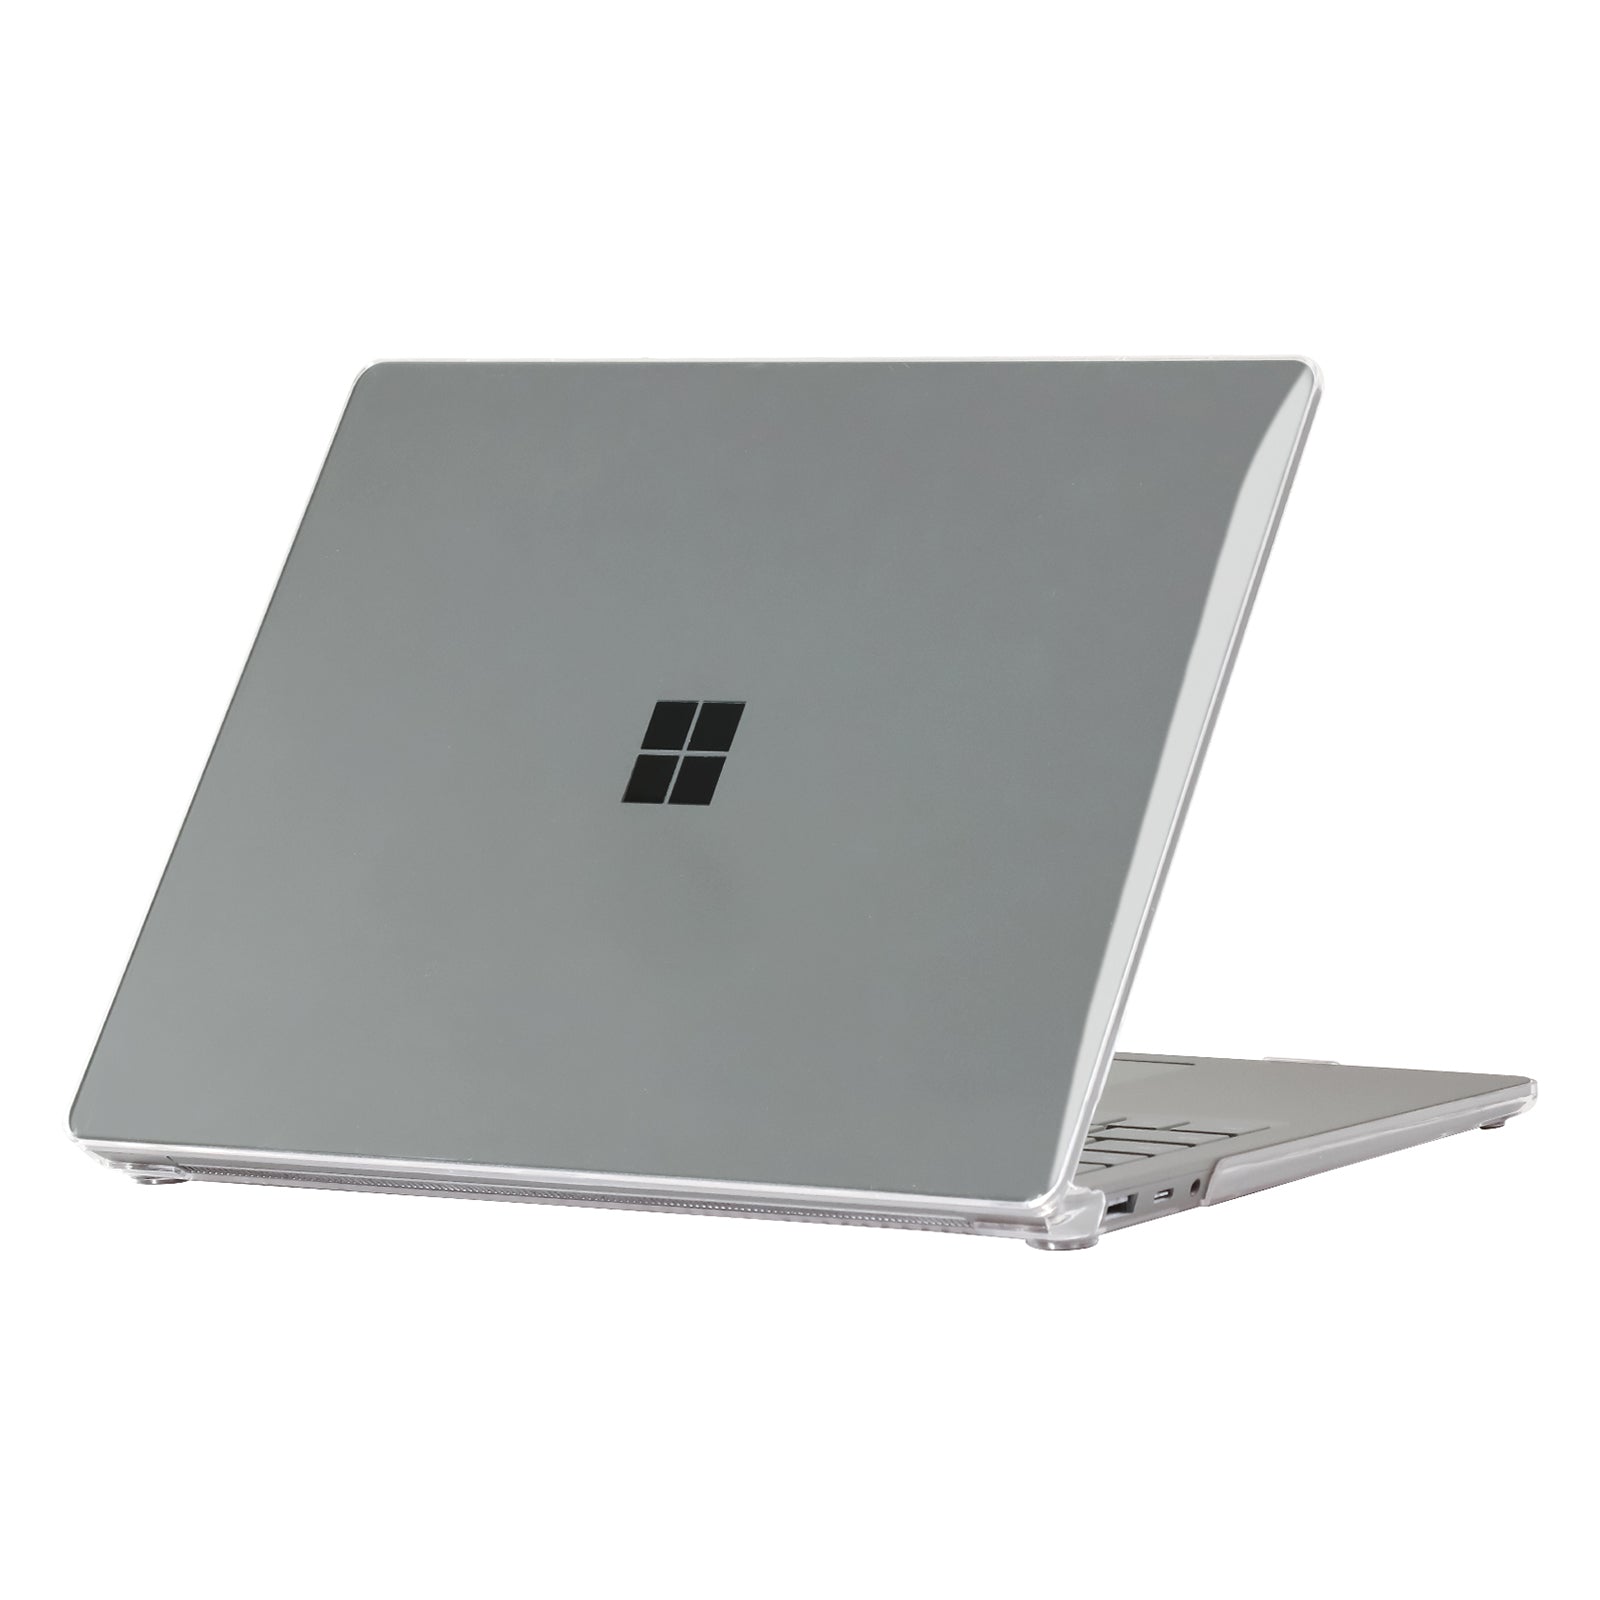 for Microsoft Surface Laptop 3 / 4 / 5 (1868 / 1951) Metal Keyboard Version Hard PC Crystal Protective Cover Shock Resistant Laptop Notebook Case - Transparent